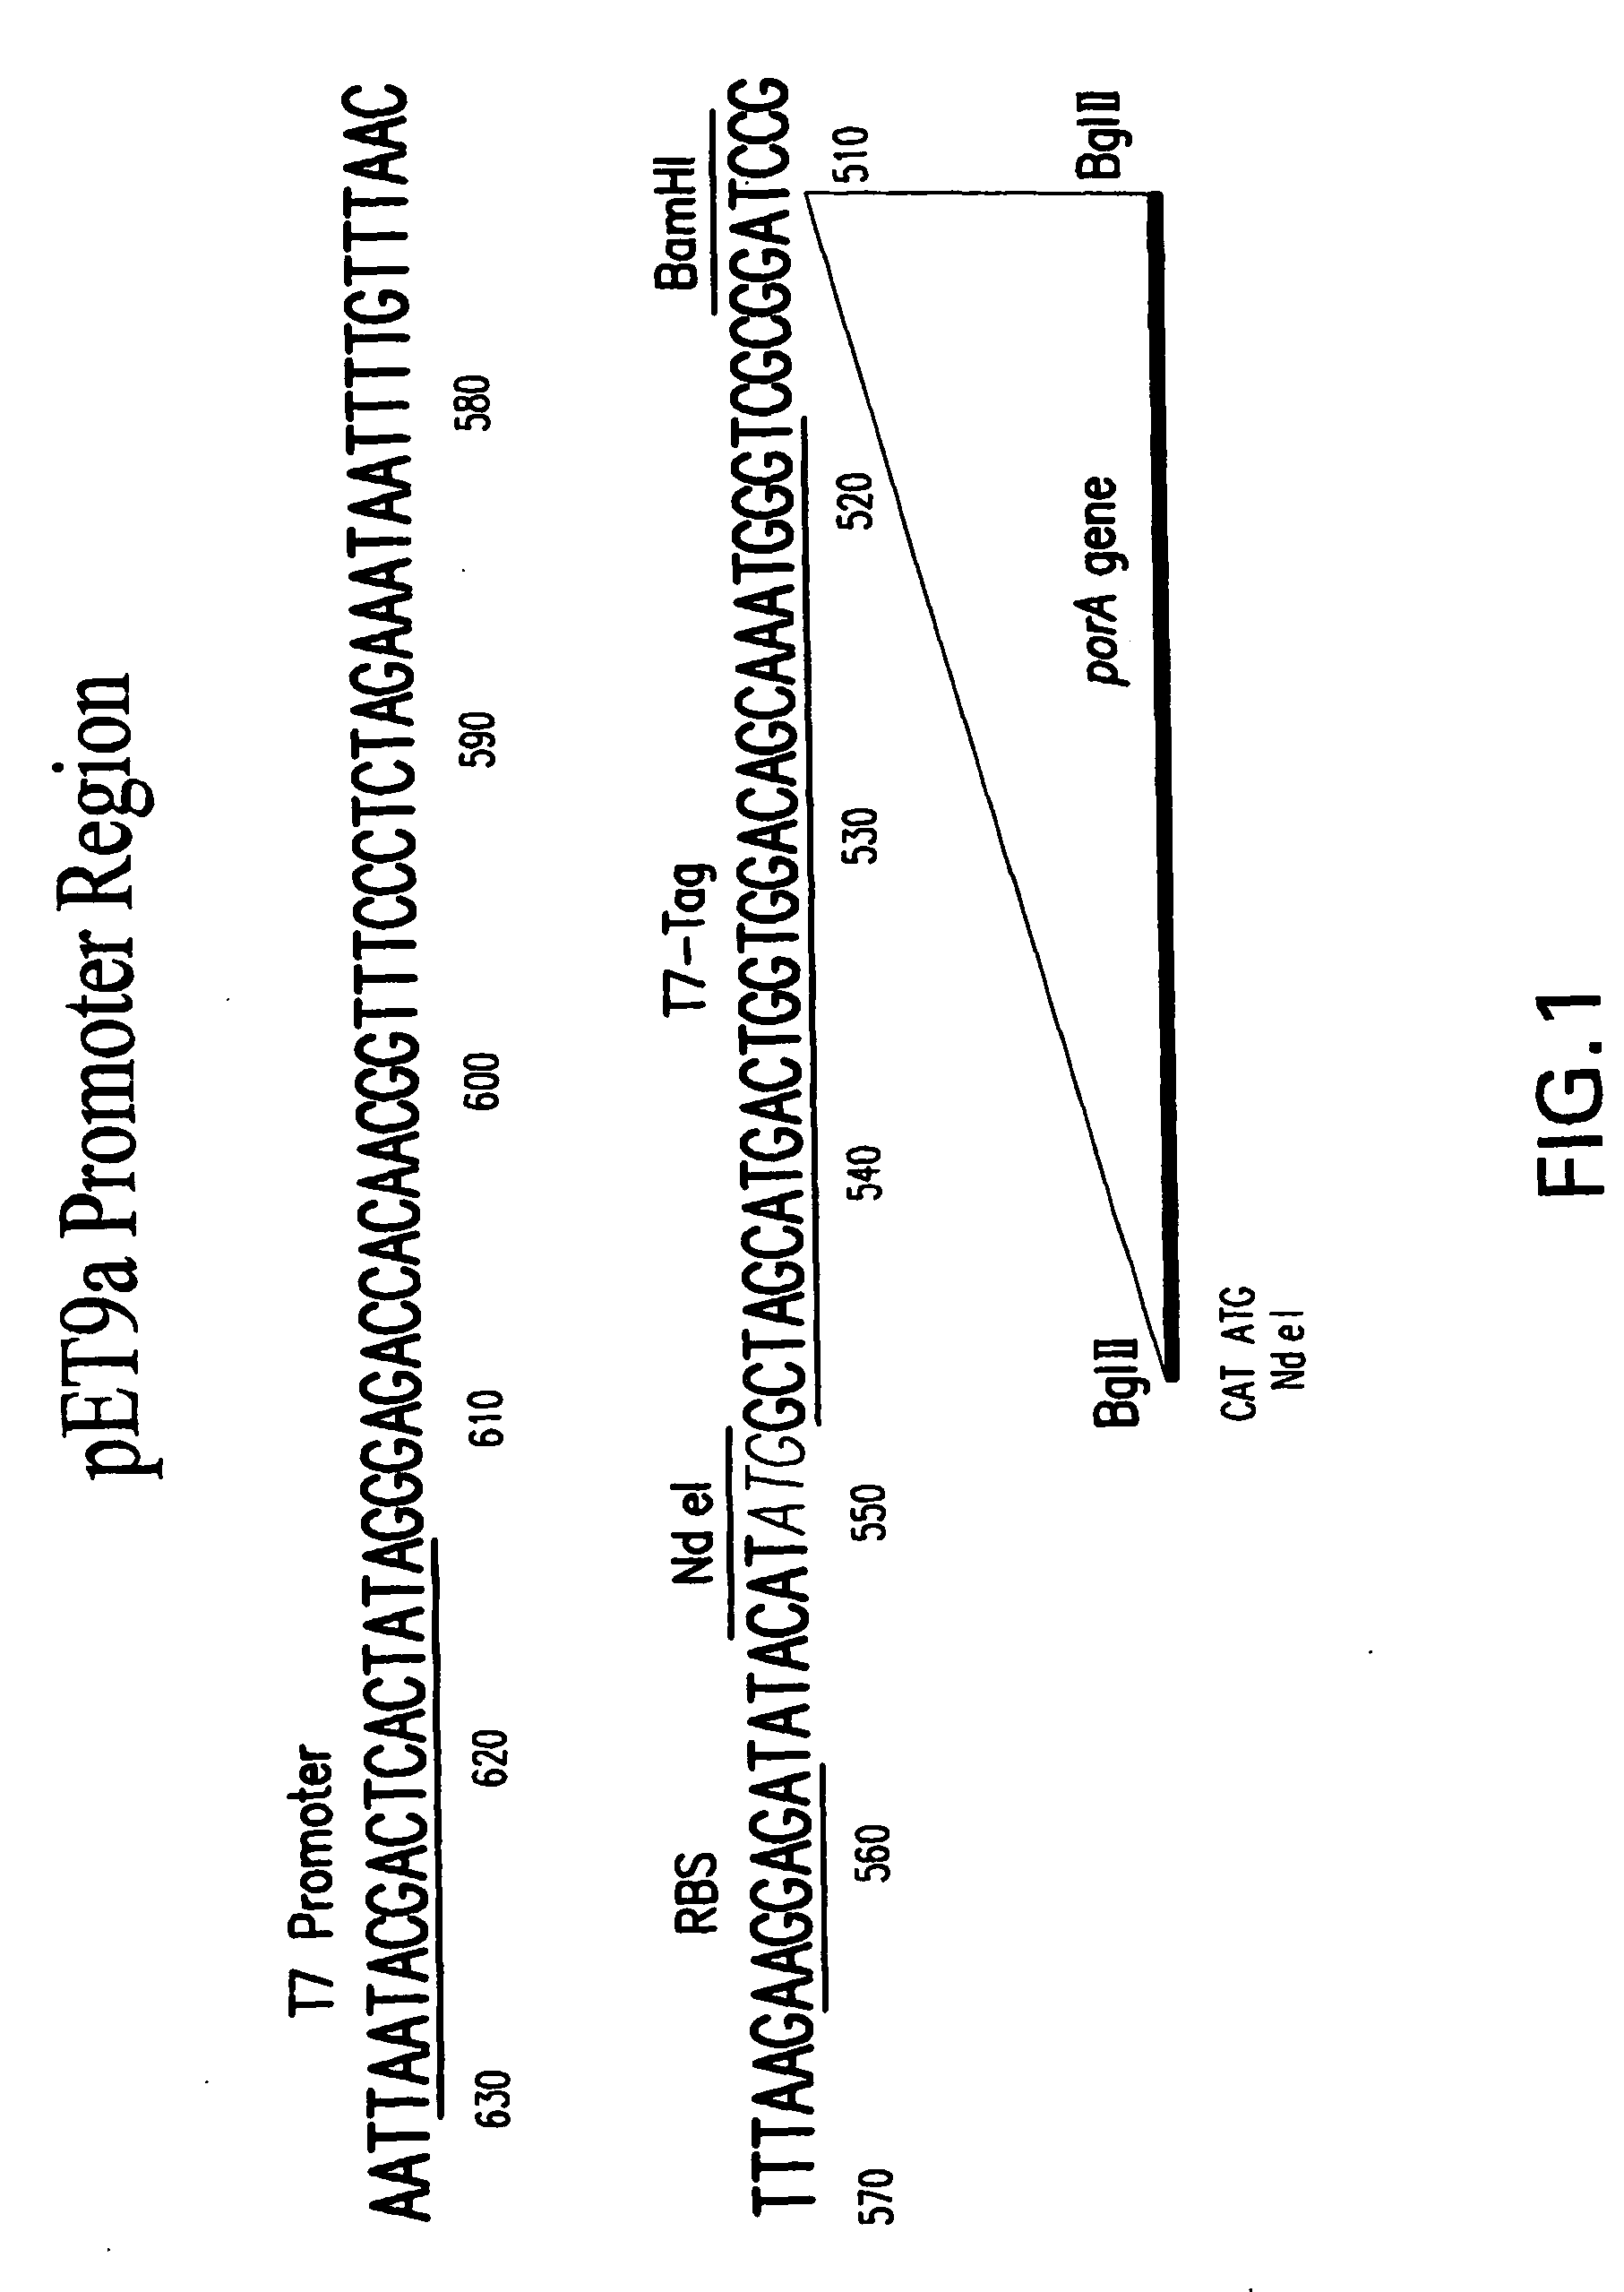 Methods for increasing neisseria protein expression and compositions thereof